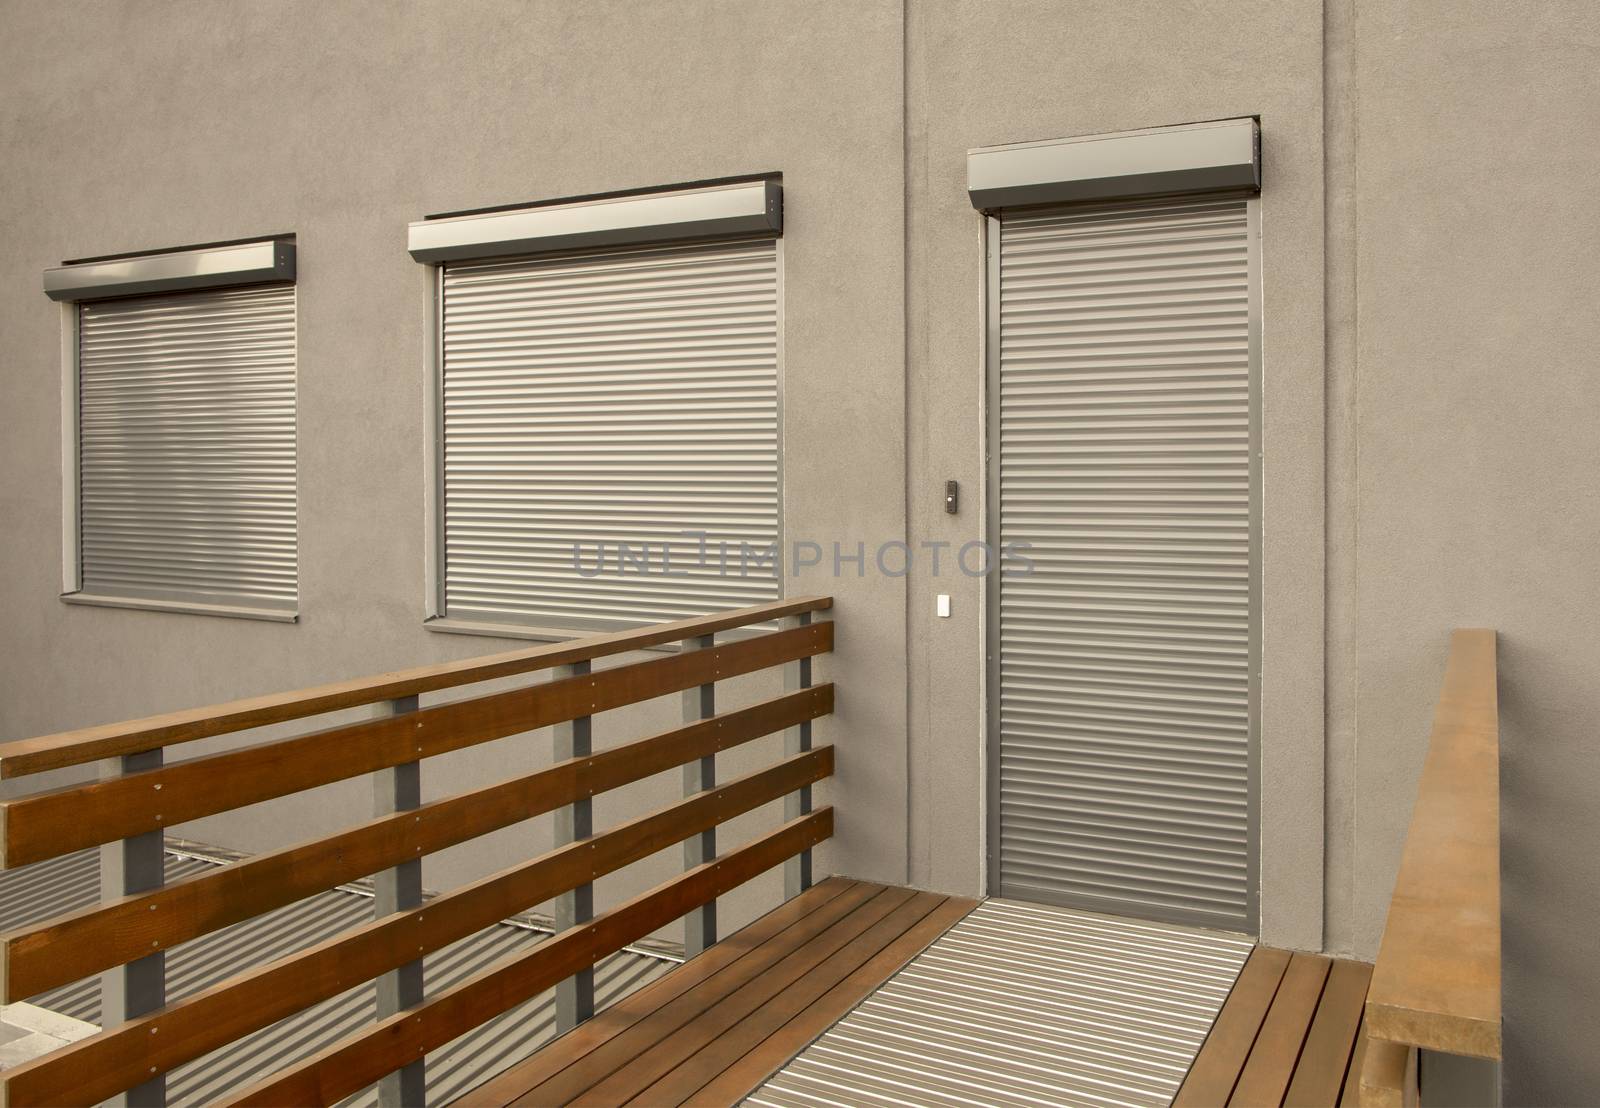 Metal blinds on the doors and windows of the facade of the house by Sergii